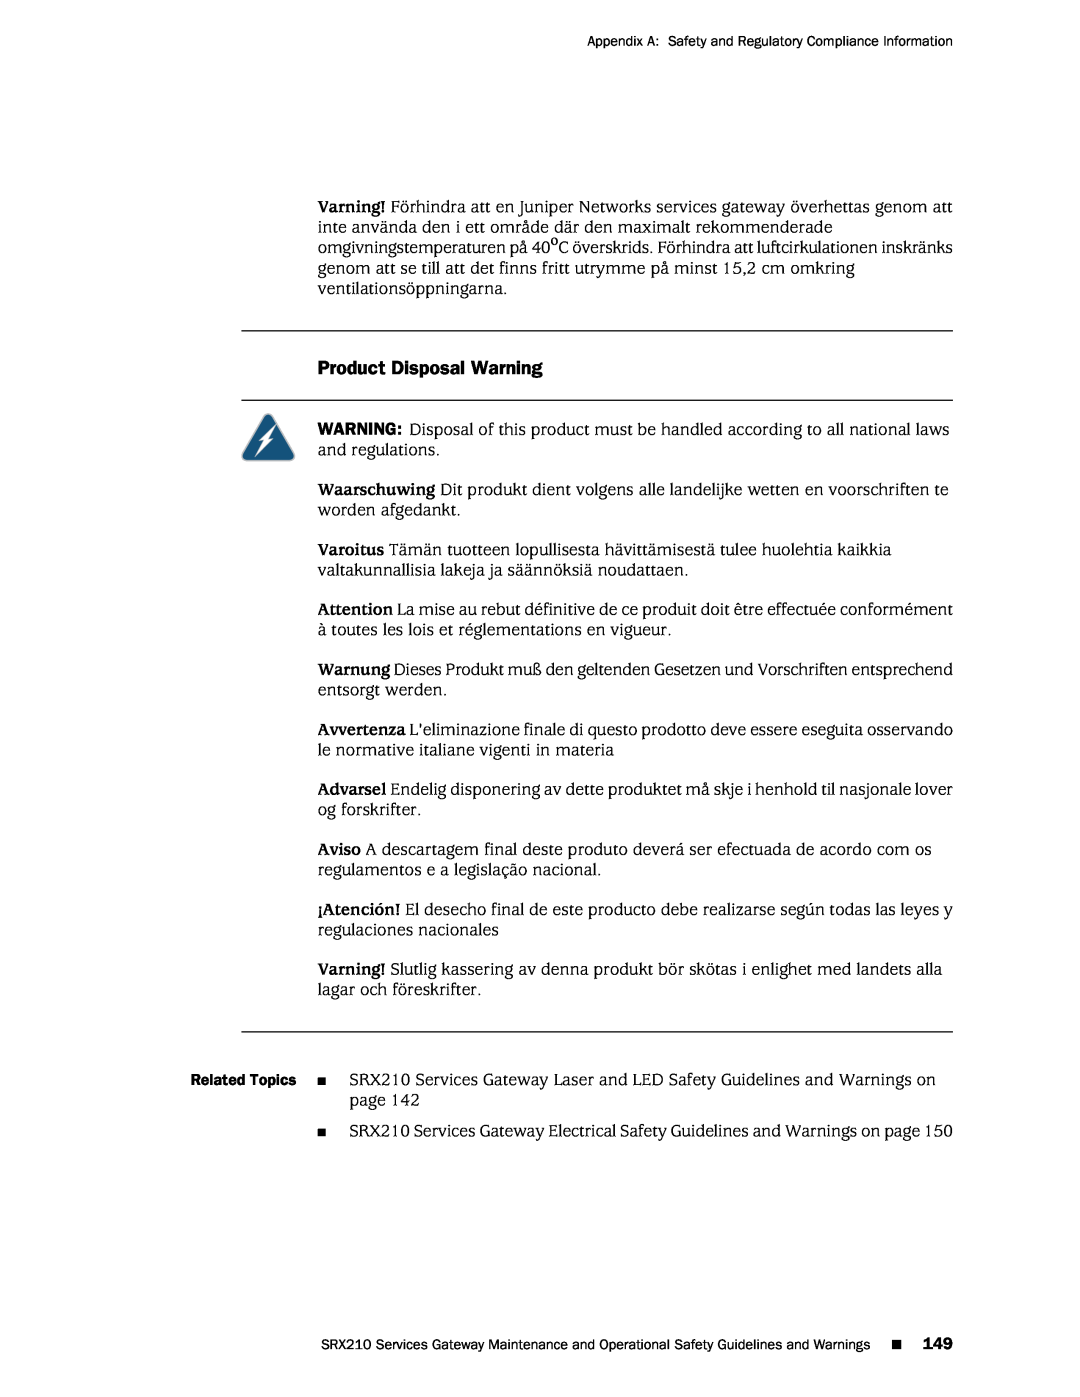 Juniper Networks SRX 210 manual Product Disposal Warning, Appendix A Safety and Regulatory Compliance Information 